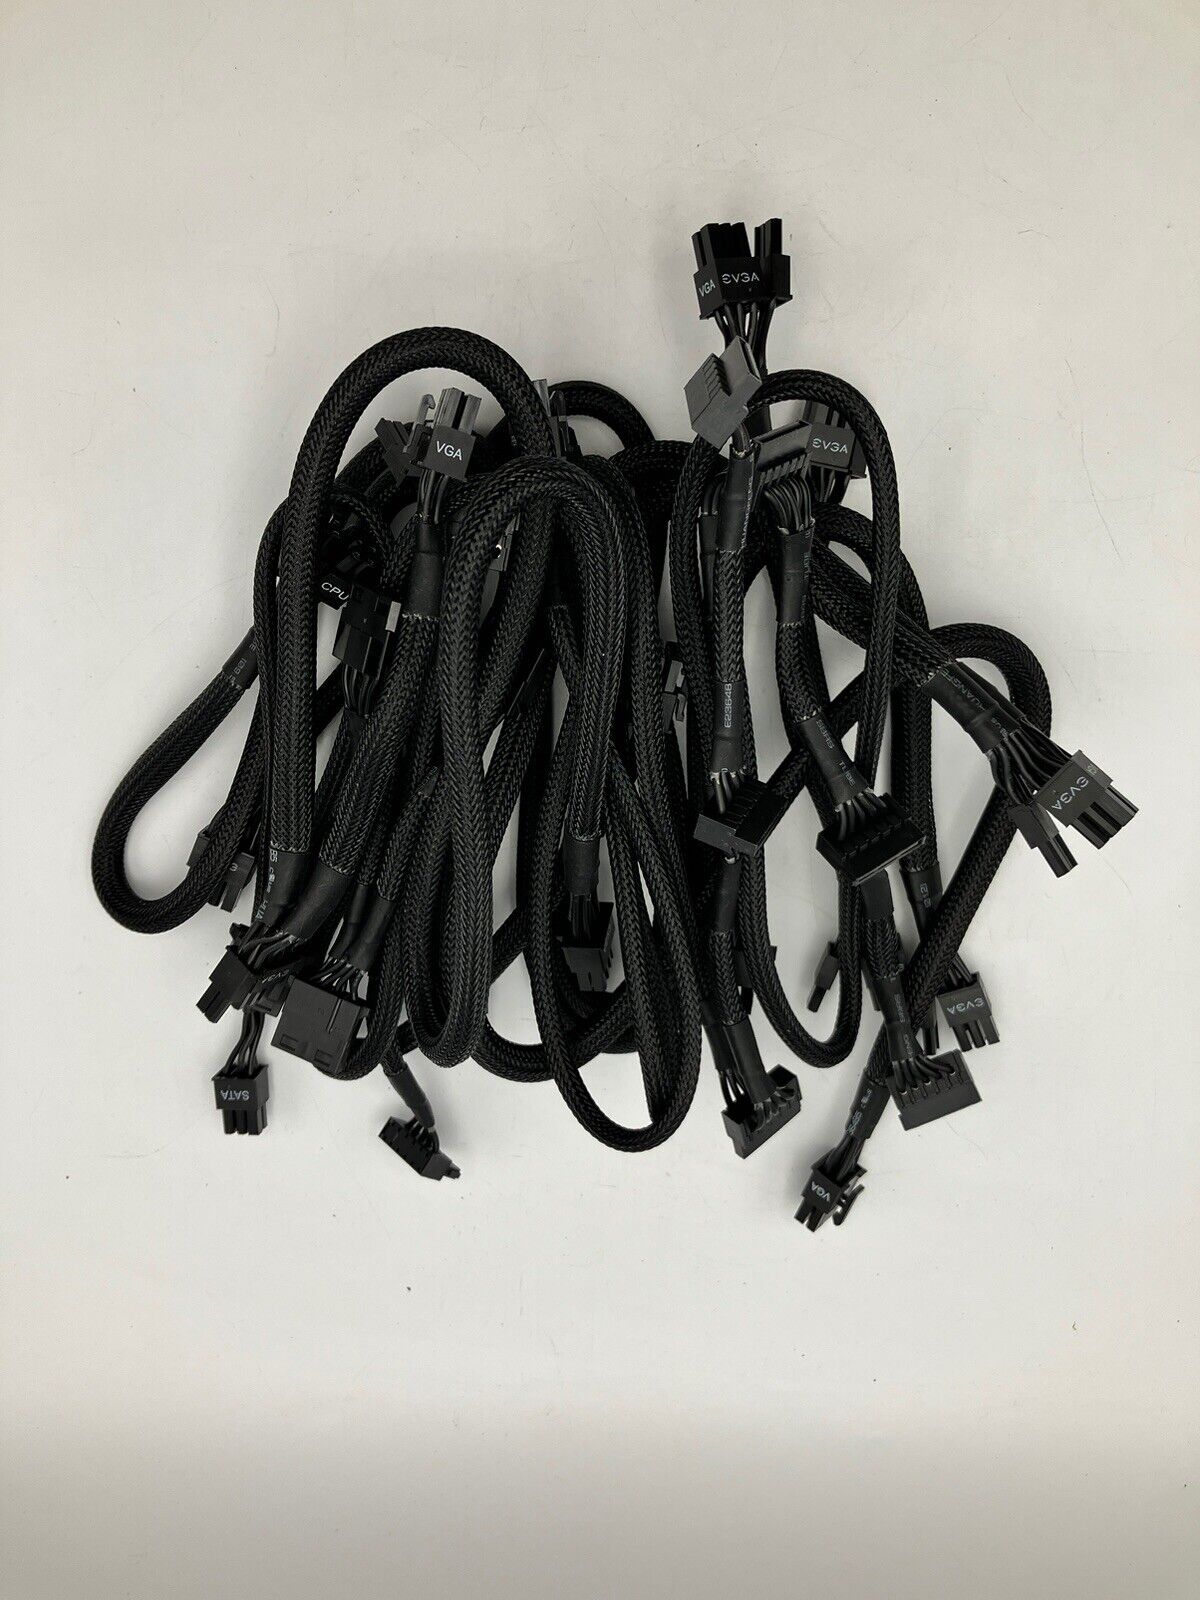 Lot Of 9 EVGA  Assorted Cables For PC Internal Connection